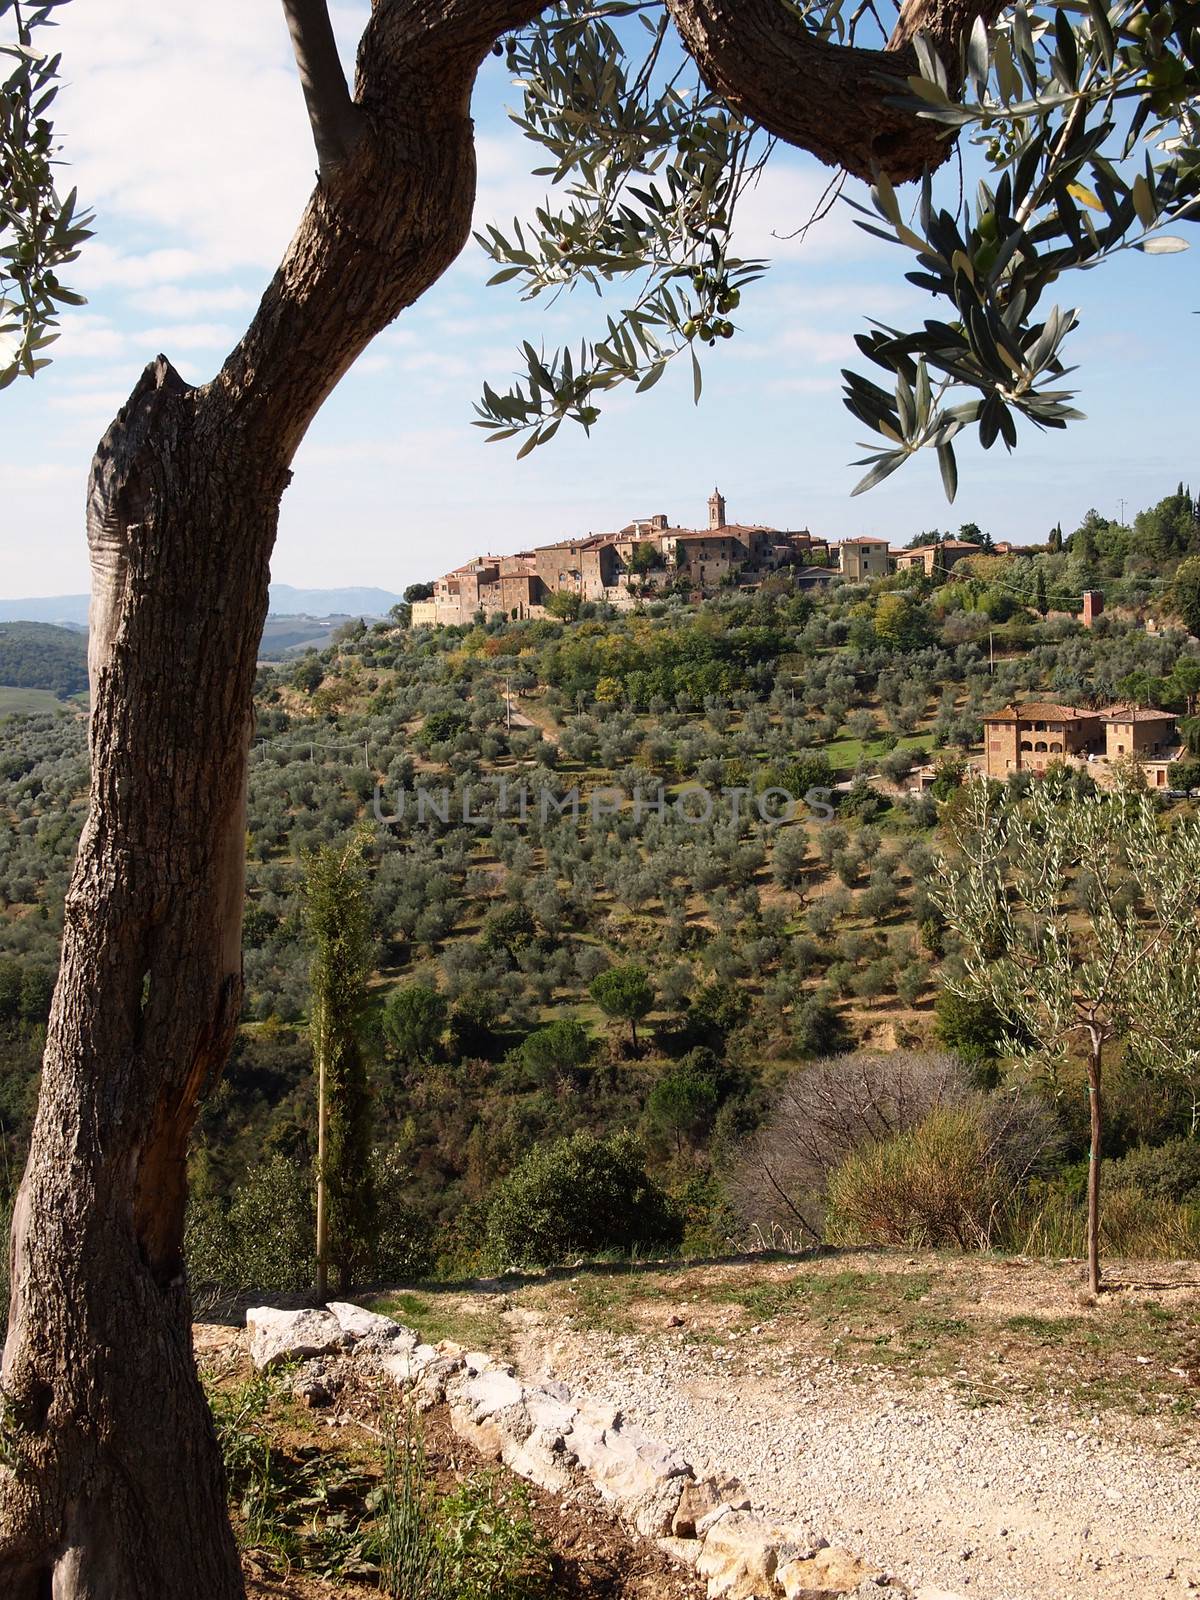 Landscape in Tuscany with an olive tree, a walking path and a typical hilltop town overlooking the Val d’Orcia, Italy.